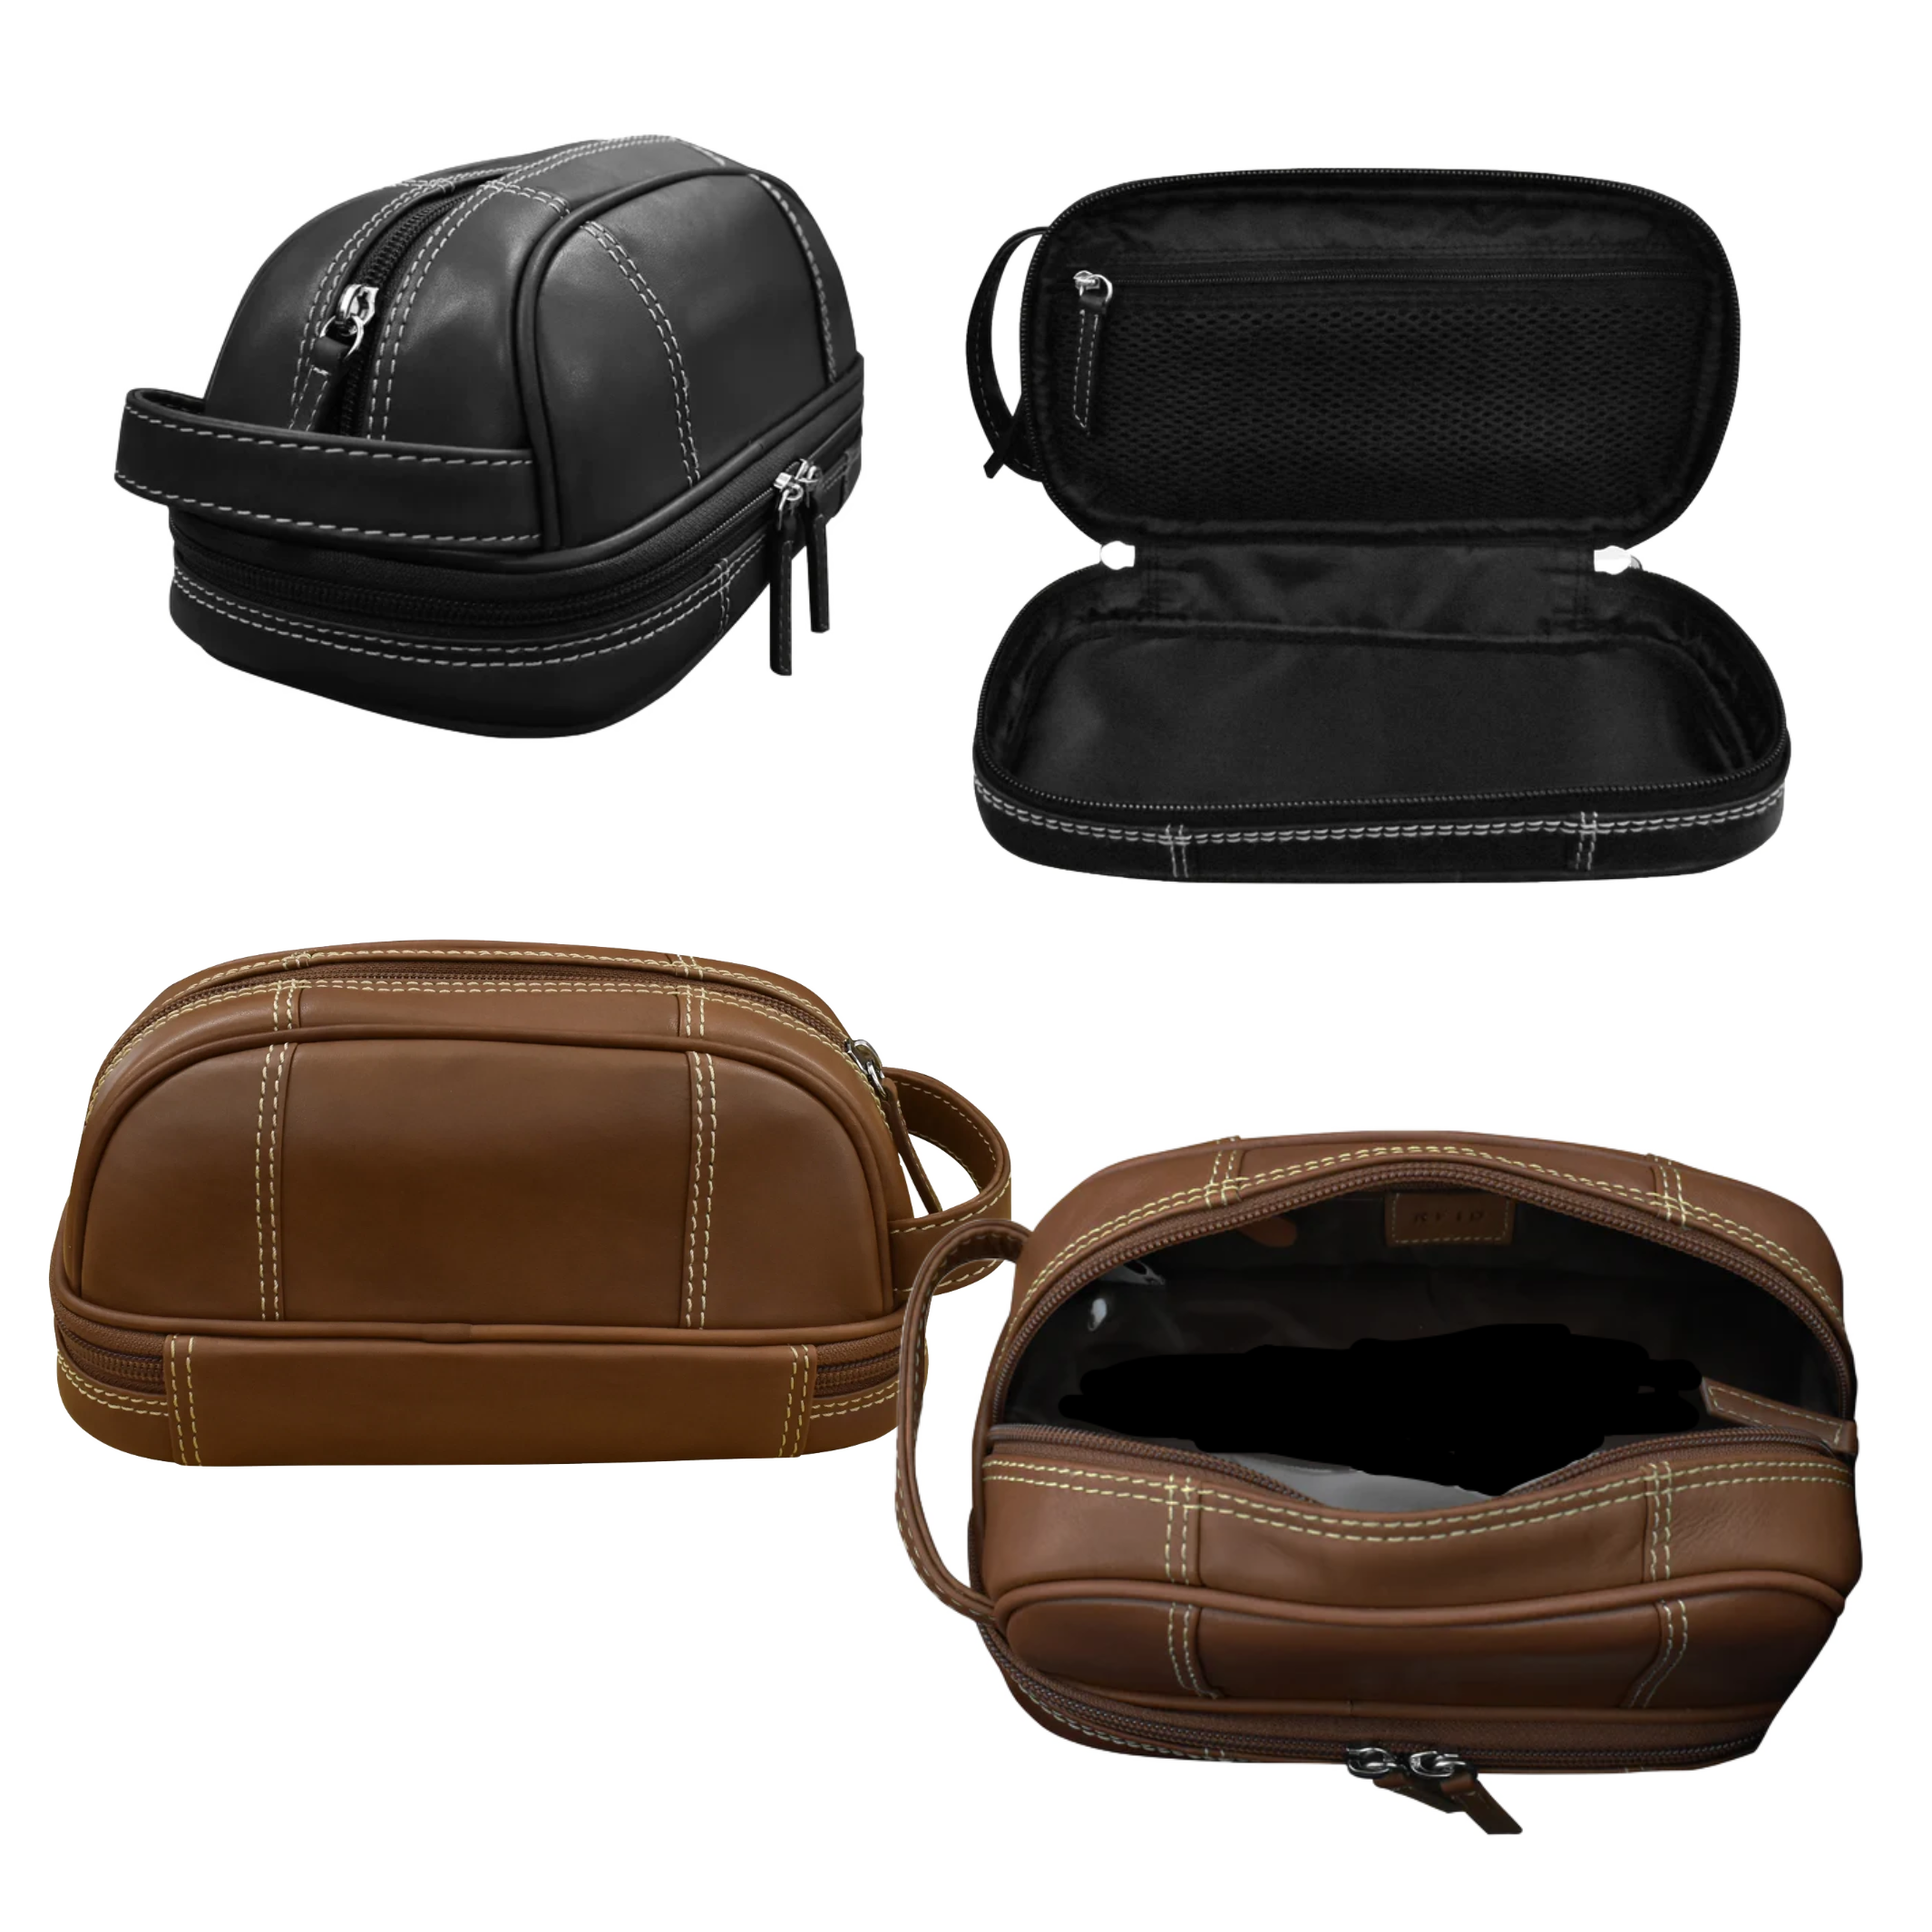 Leather Toiletry Case with a zip-around bottom compartment